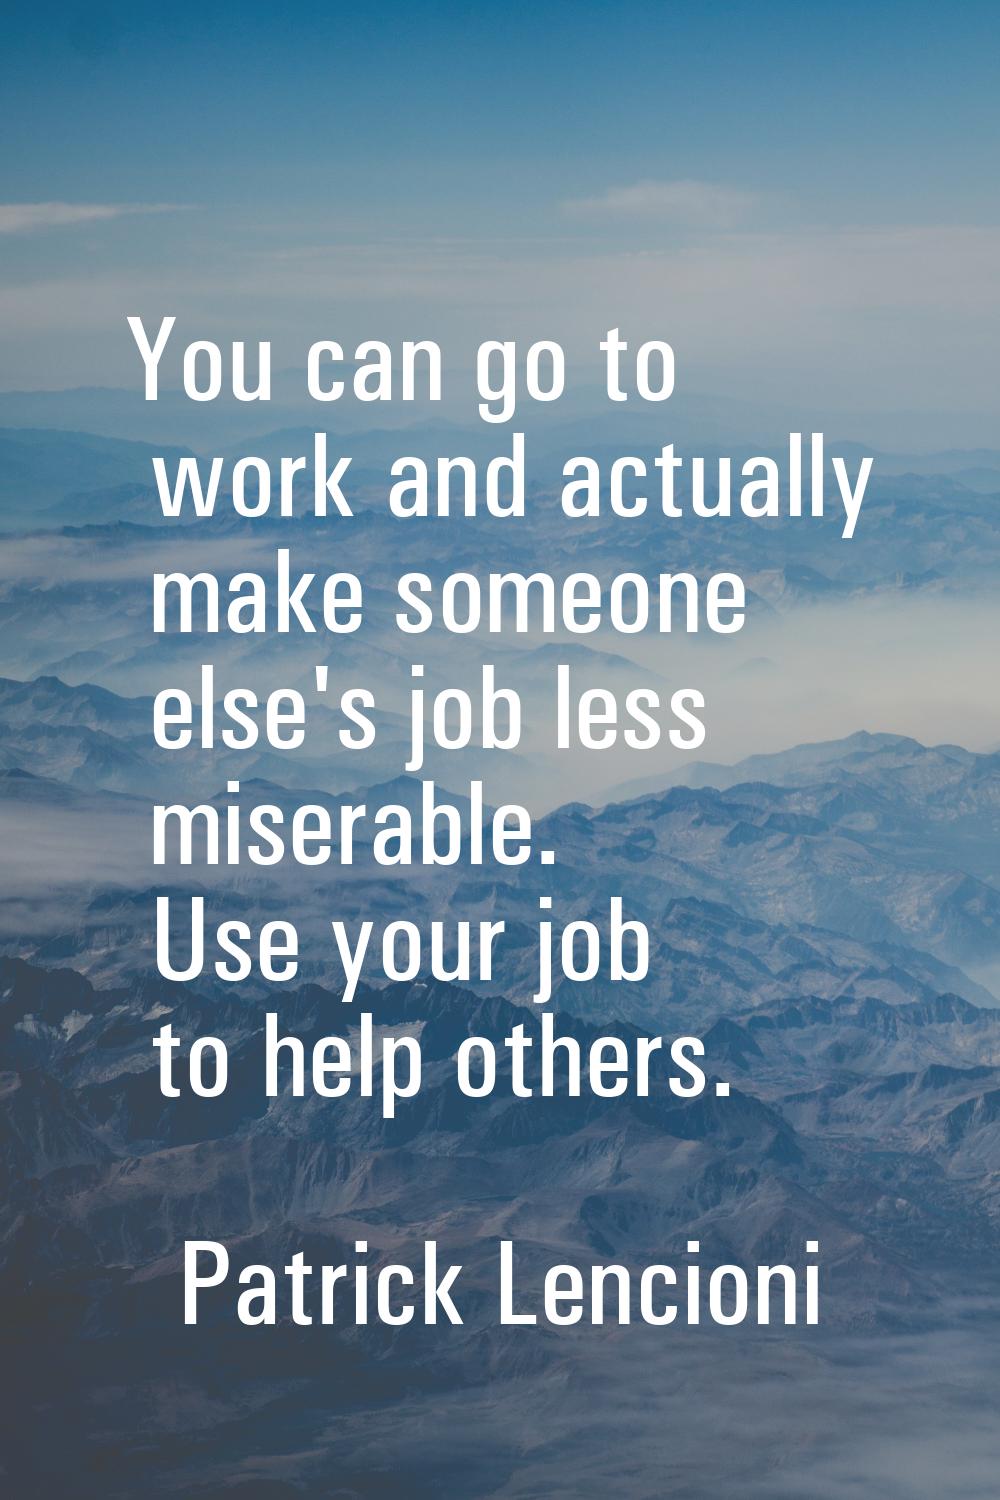 You can go to work and actually make someone else's job less miserable. Use your job to help others